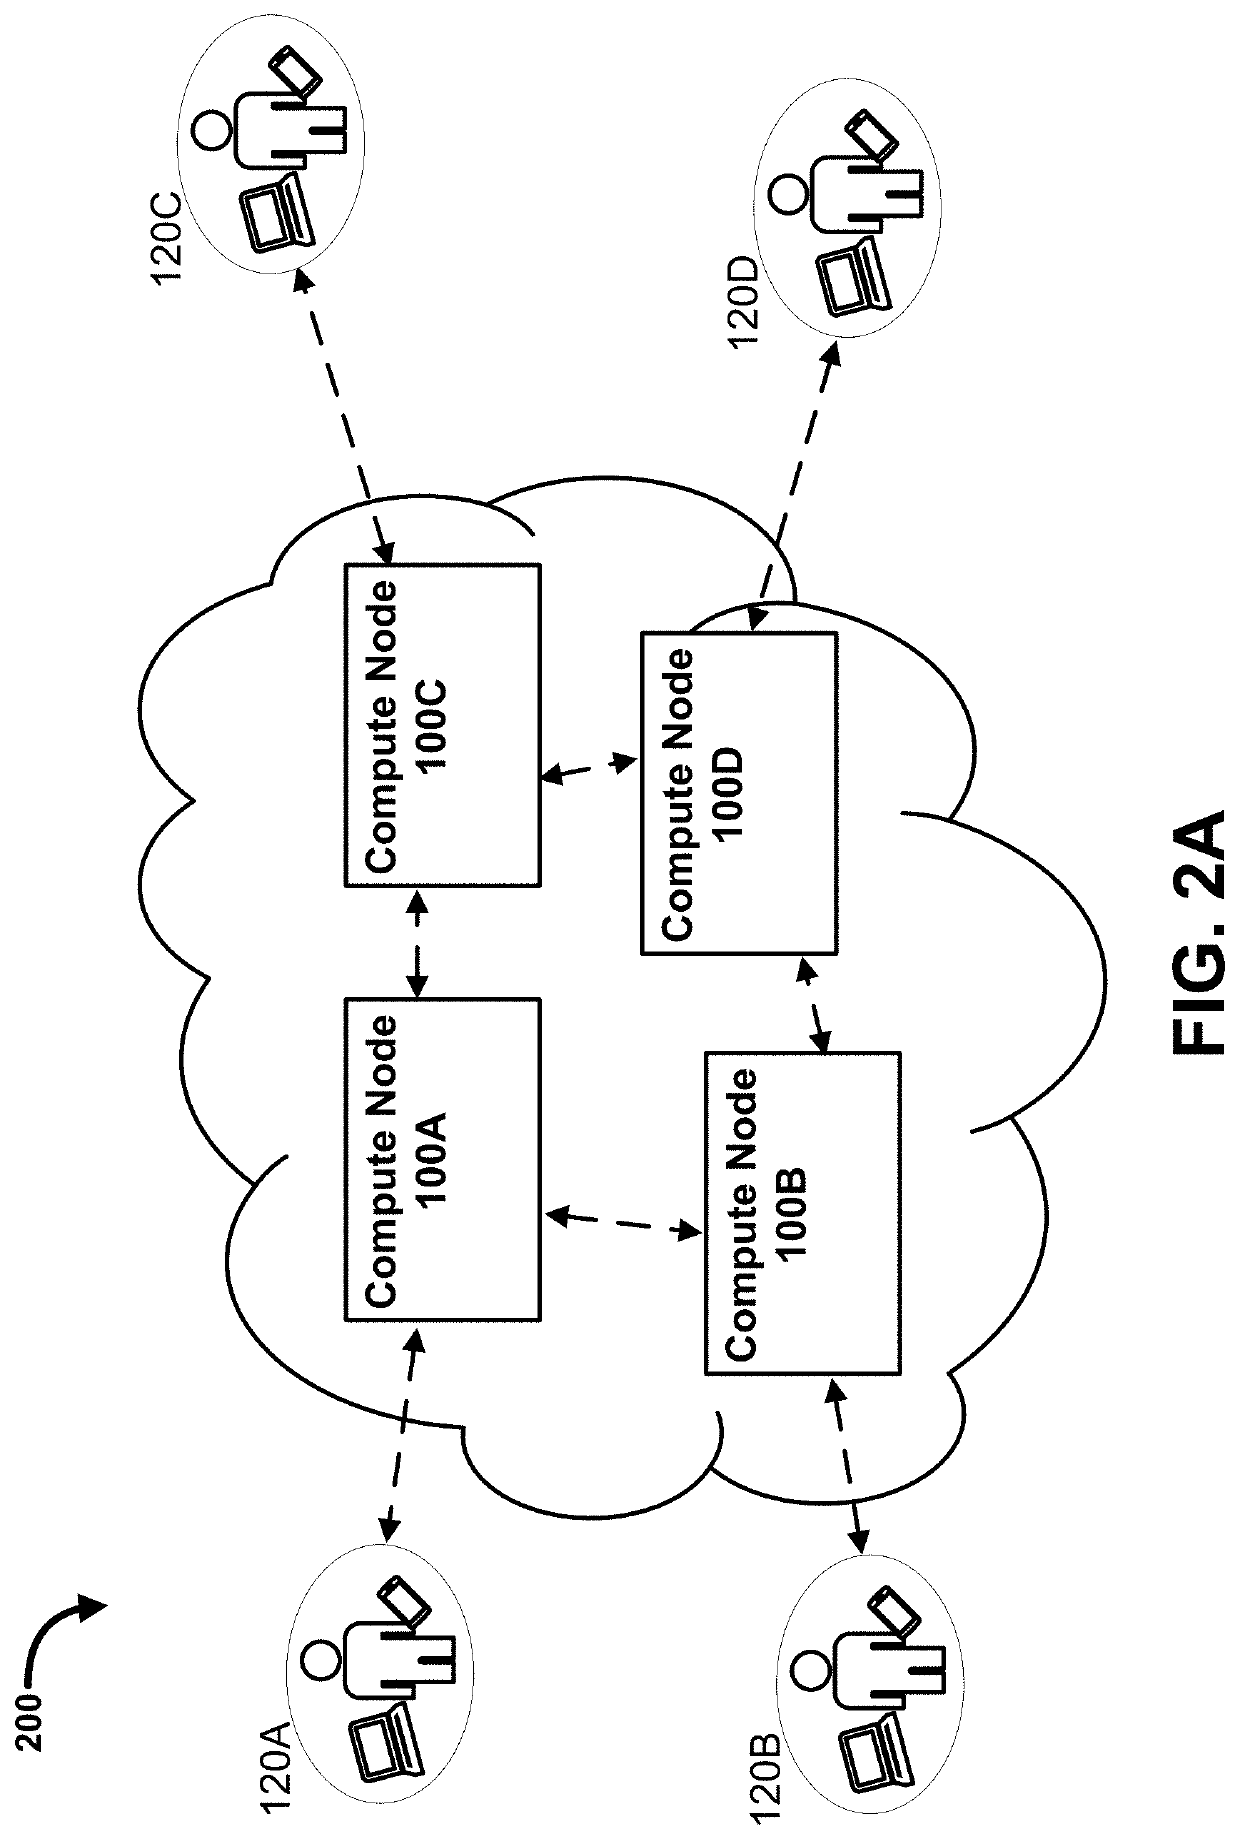 Active adaptation of networked compute devices using vetted reusable software components